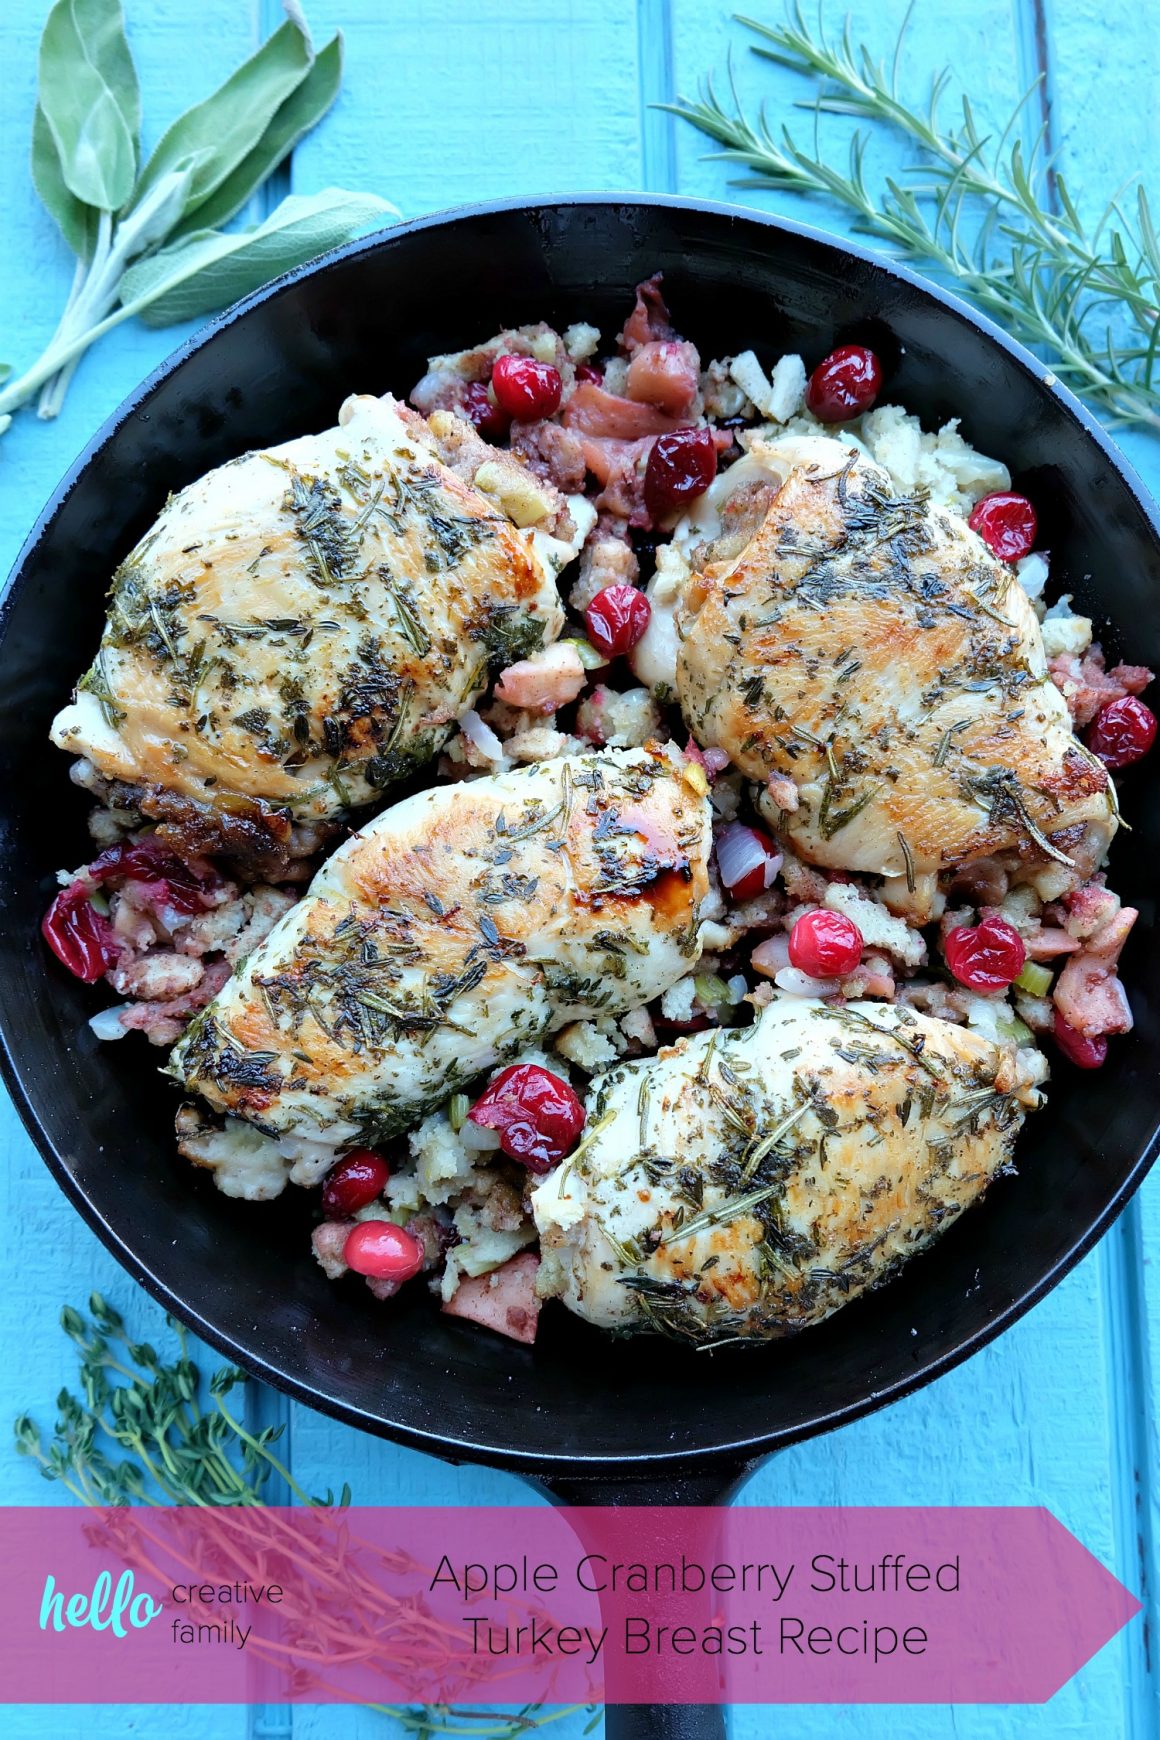 This delicious apple cranberry stuffed turkey breast recipe is perfect for a Thanksgiving meal or for a weeknight dinner! Ready in 45 minutes or less, this is a fabulous Thanksgiving dinner for two, four or more! Great for small family festivities! Recipe development #sponsored by Canadian Turkey.